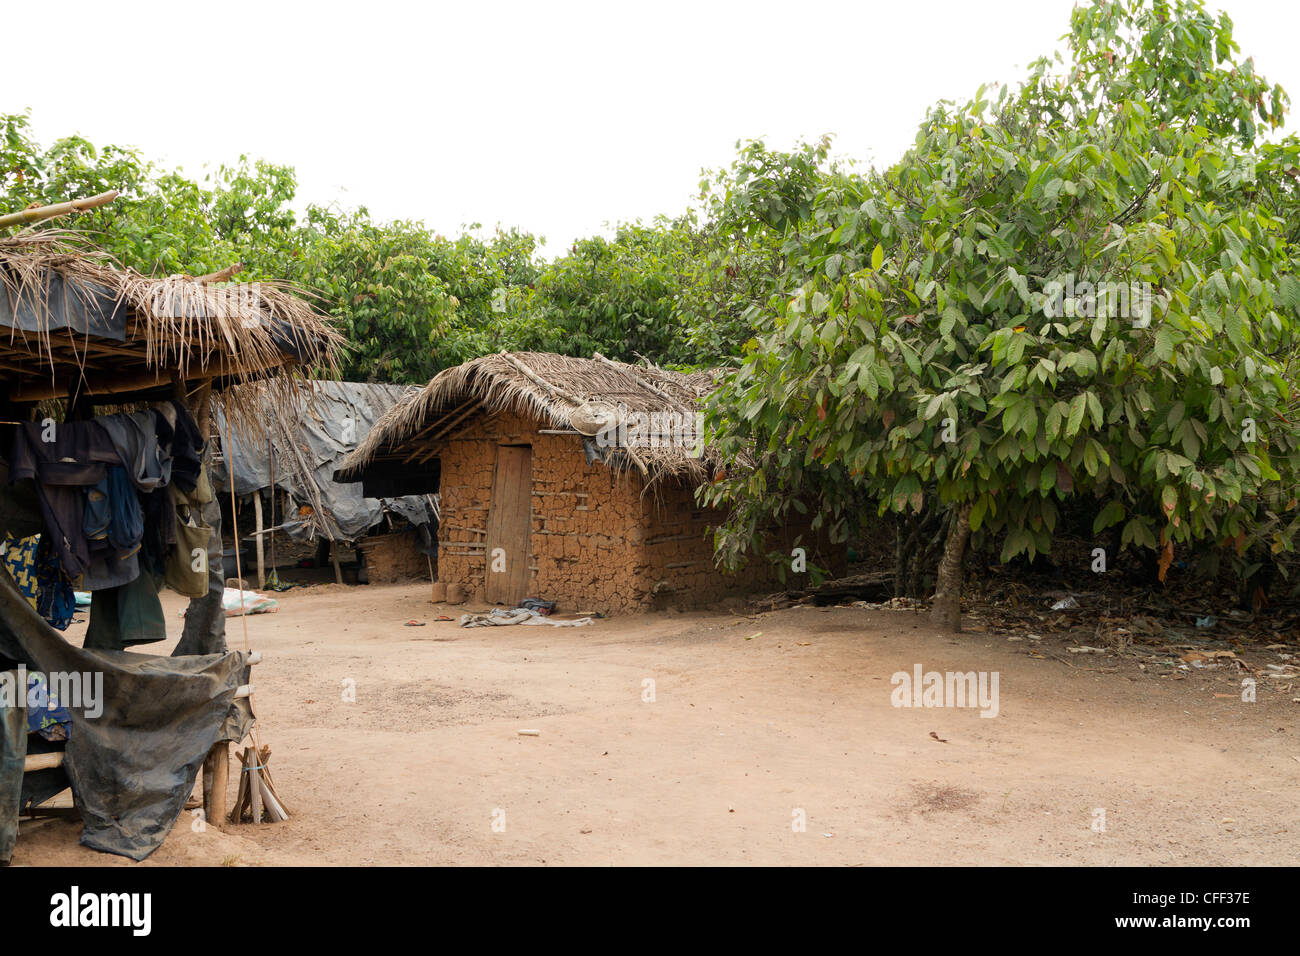 A Village surrounded by cacao trees ,Dukoue,Ivory Coast ,Cote d'Ivoire,West Africa Stock Photo